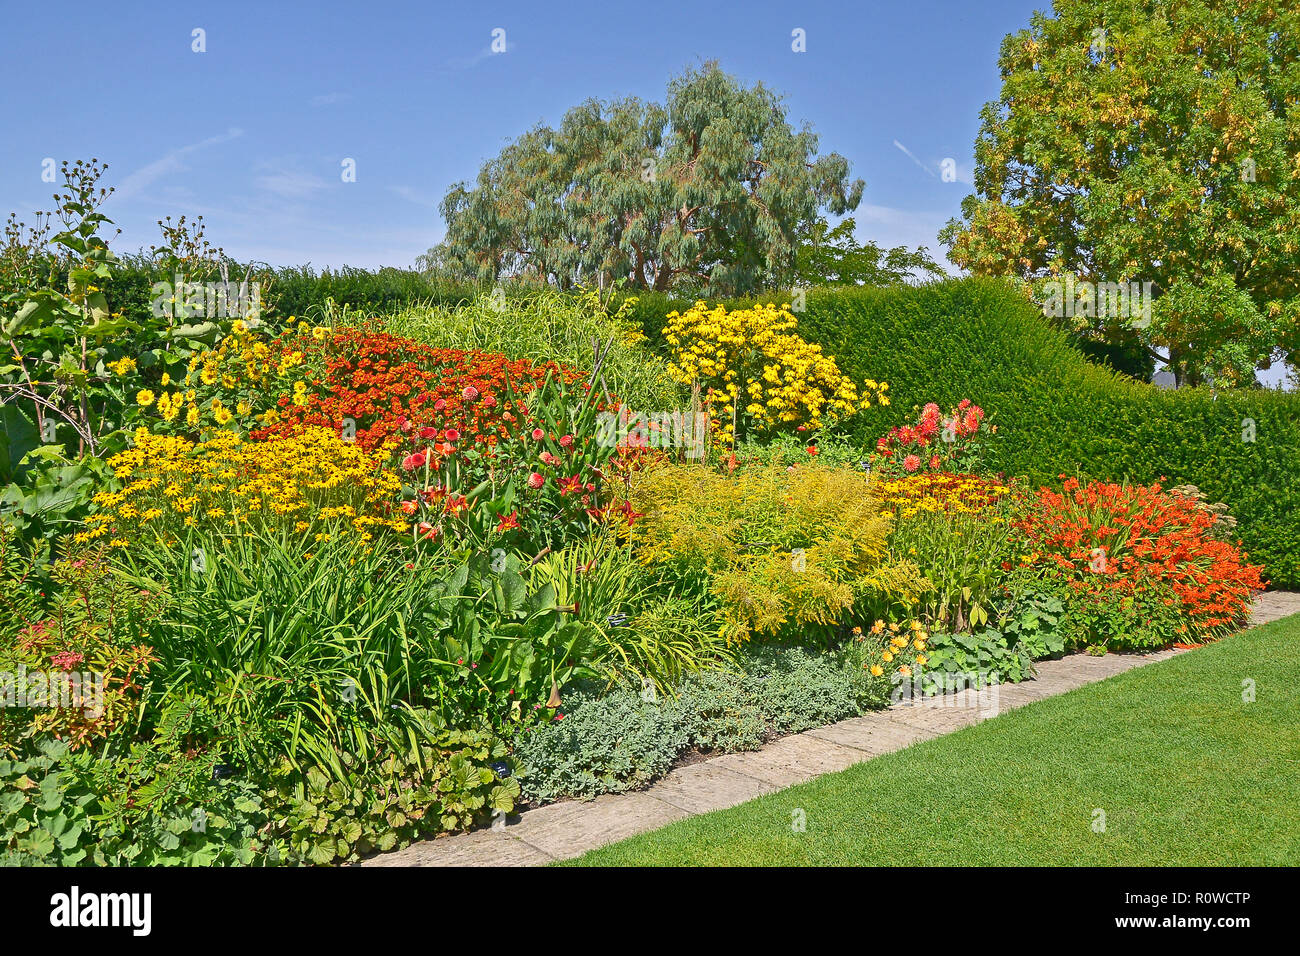 A colourful enclosed Garden 'Room' well planted with mixed planting including, crocosmia, heleniums, dahlias, coreopsis and rudbeckia and grasses Stock Photo